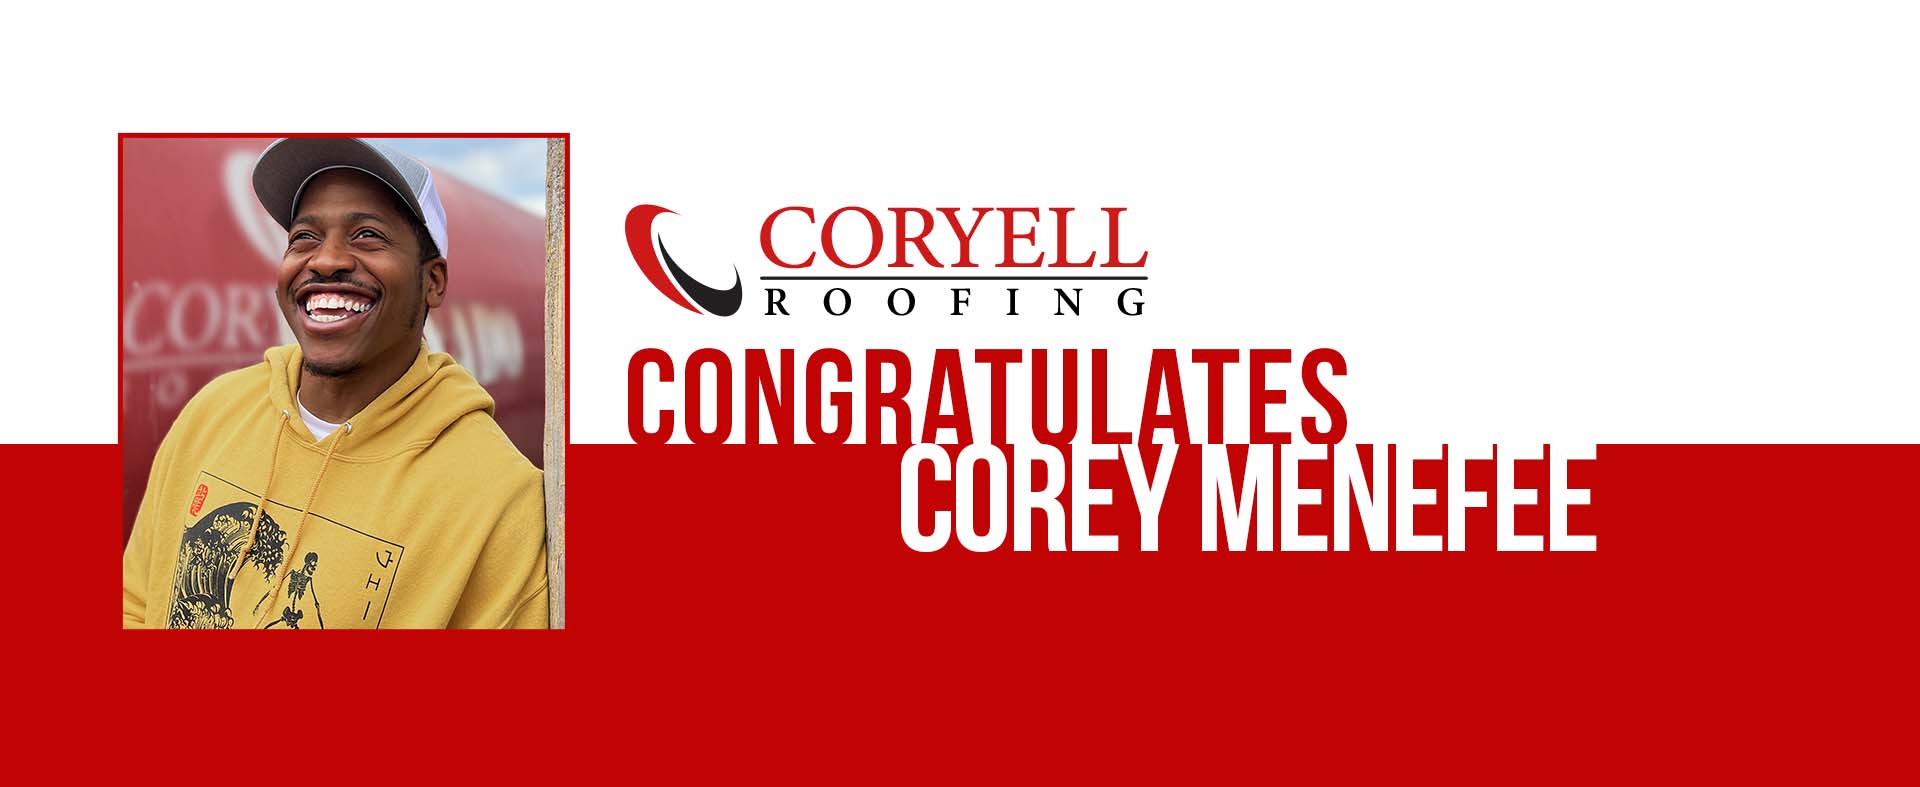 Welcoming Corey Menefee: Enhancing Our IT Capabilities at Coryell Roofing